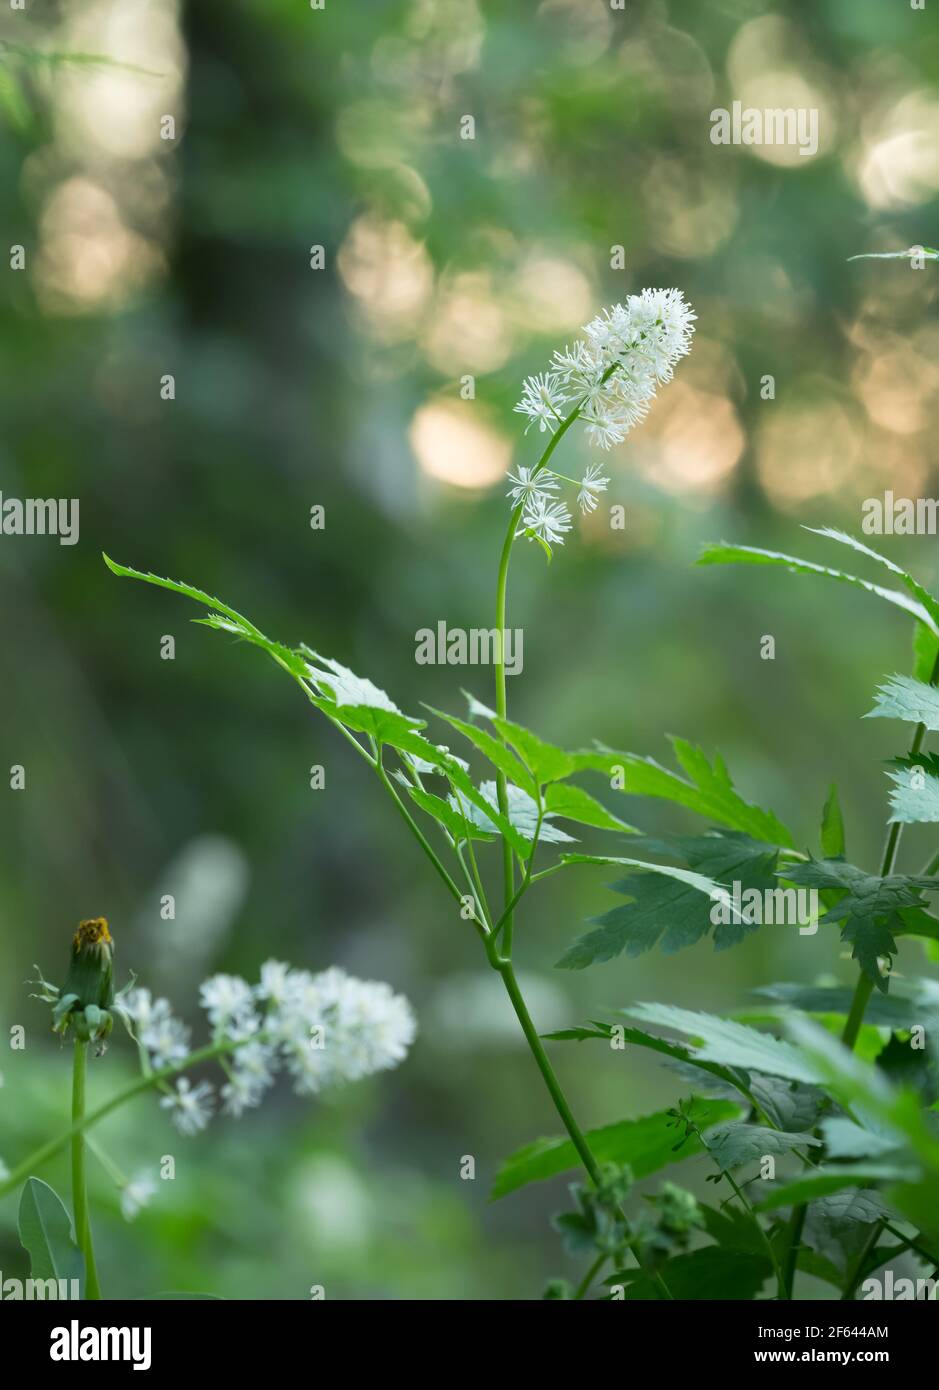 Blooming baneberry, Actaea spicata, feflections in the background Stock Photo